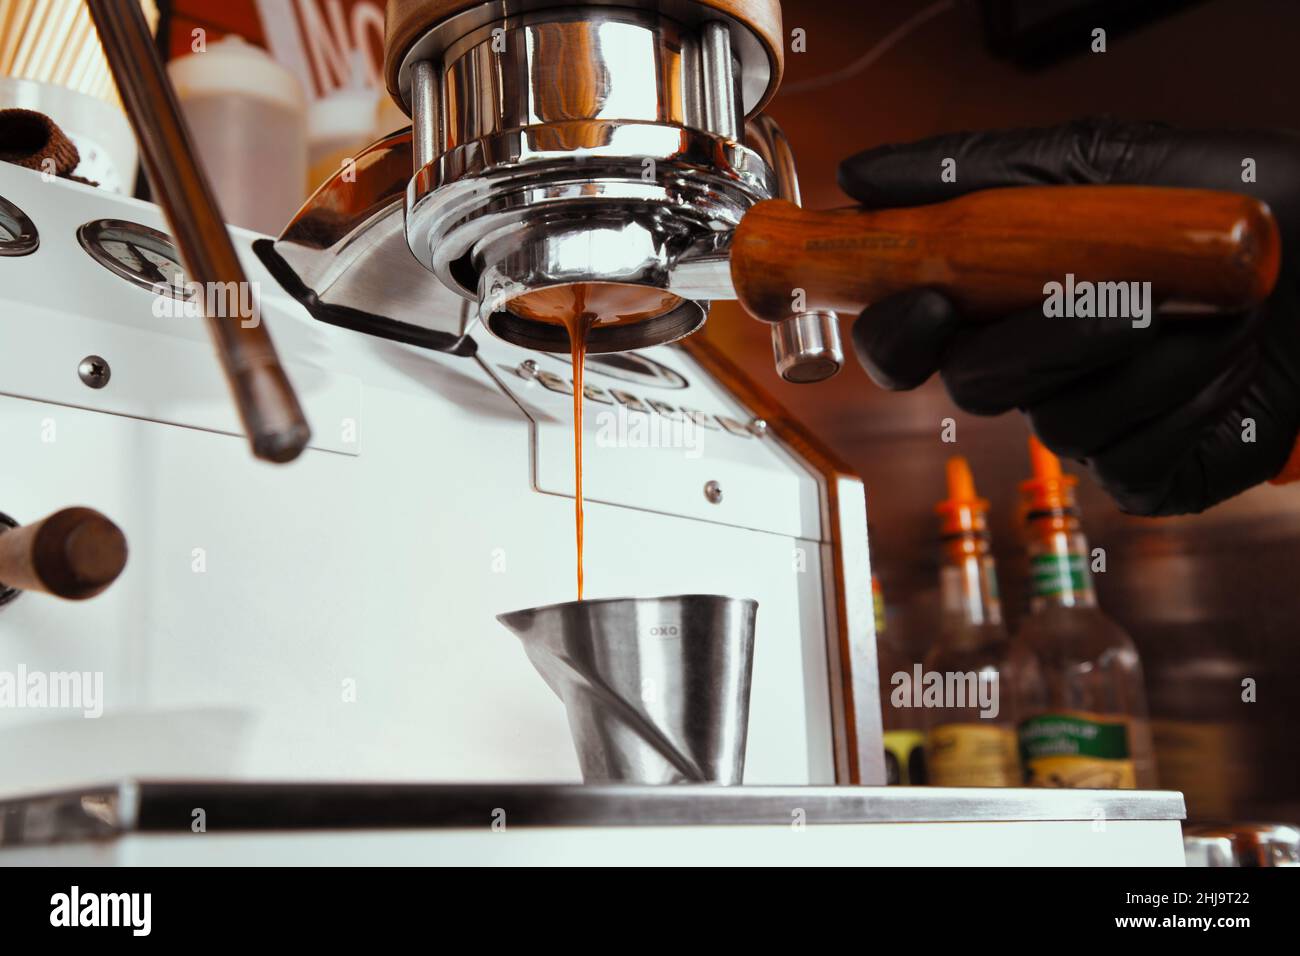 https://c8.alamy.com/comp/2HJ9T22/fresh-morning-coffee-pouring-from-a-vintage-coffeeshop-espresso-machine-2HJ9T22.jpg